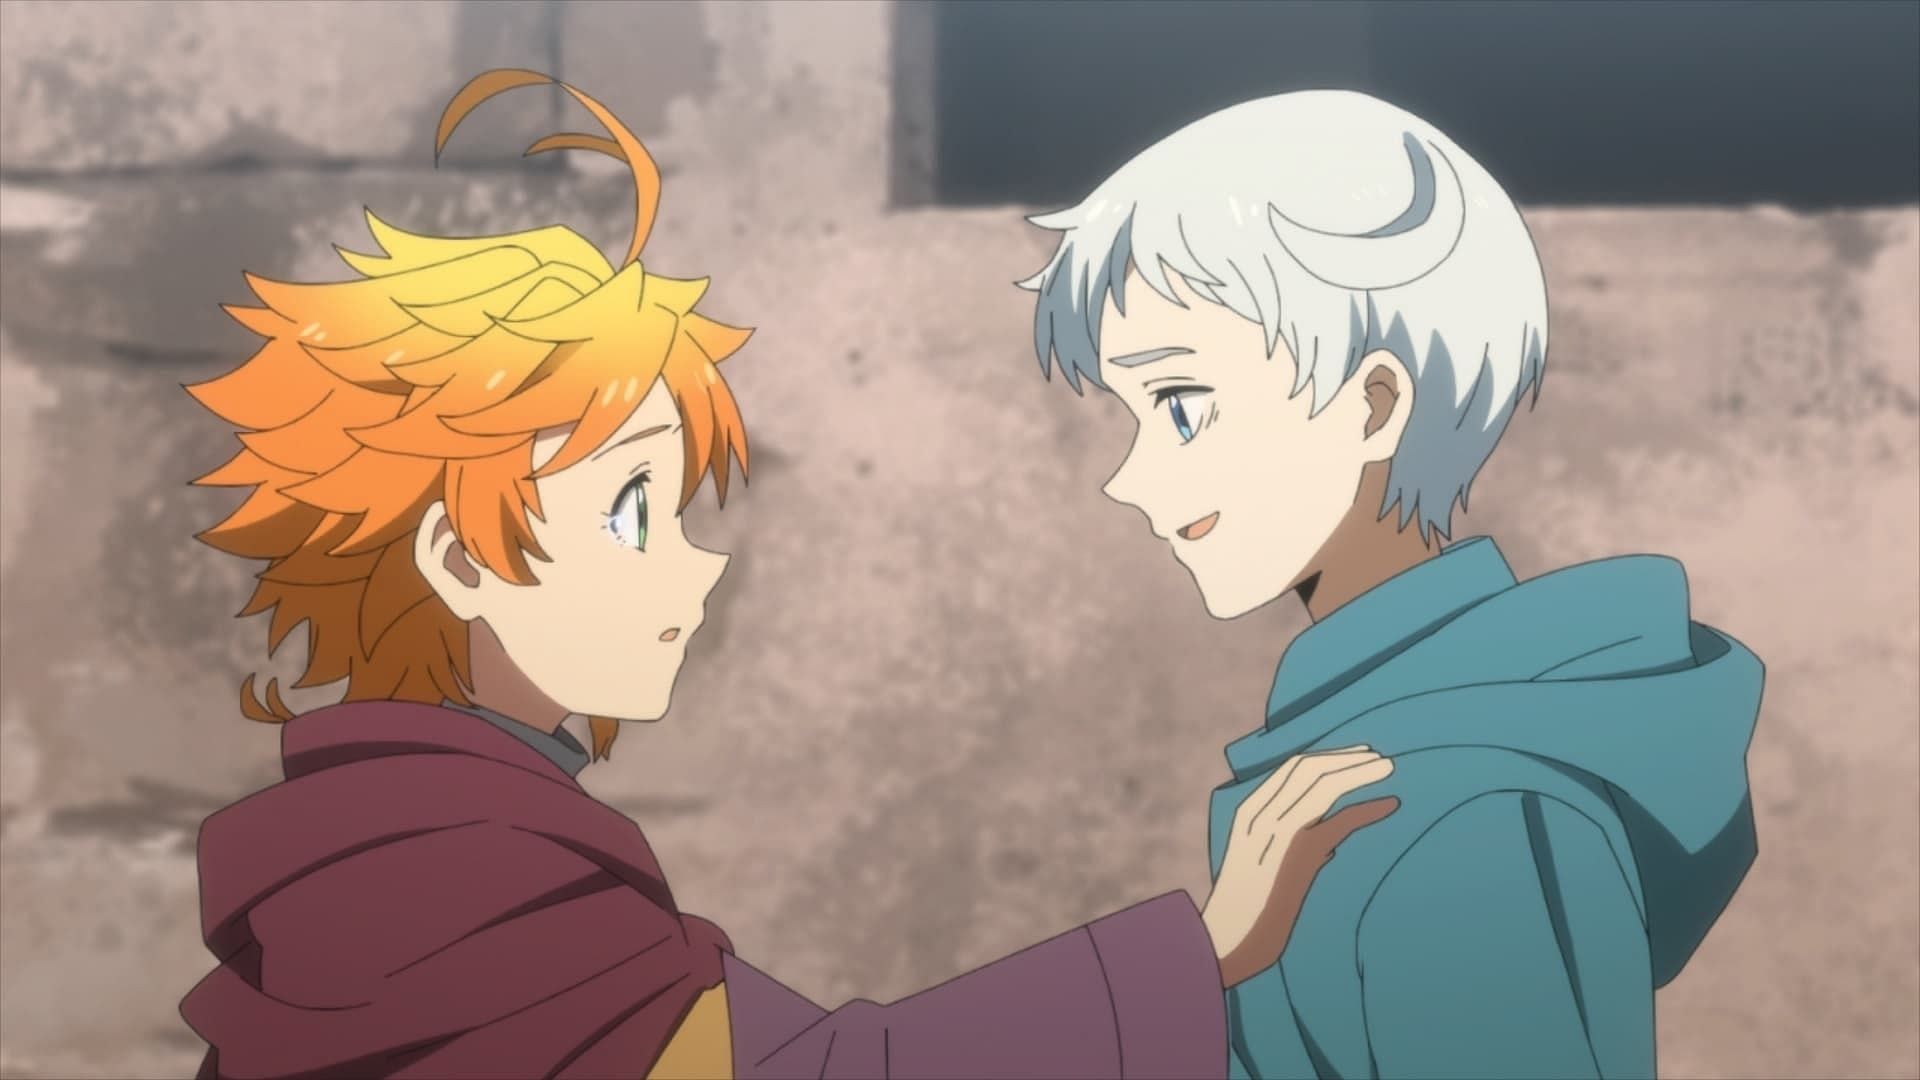 Norman and Emma as seen in The Promised Neverland (Image via Cloverworks)